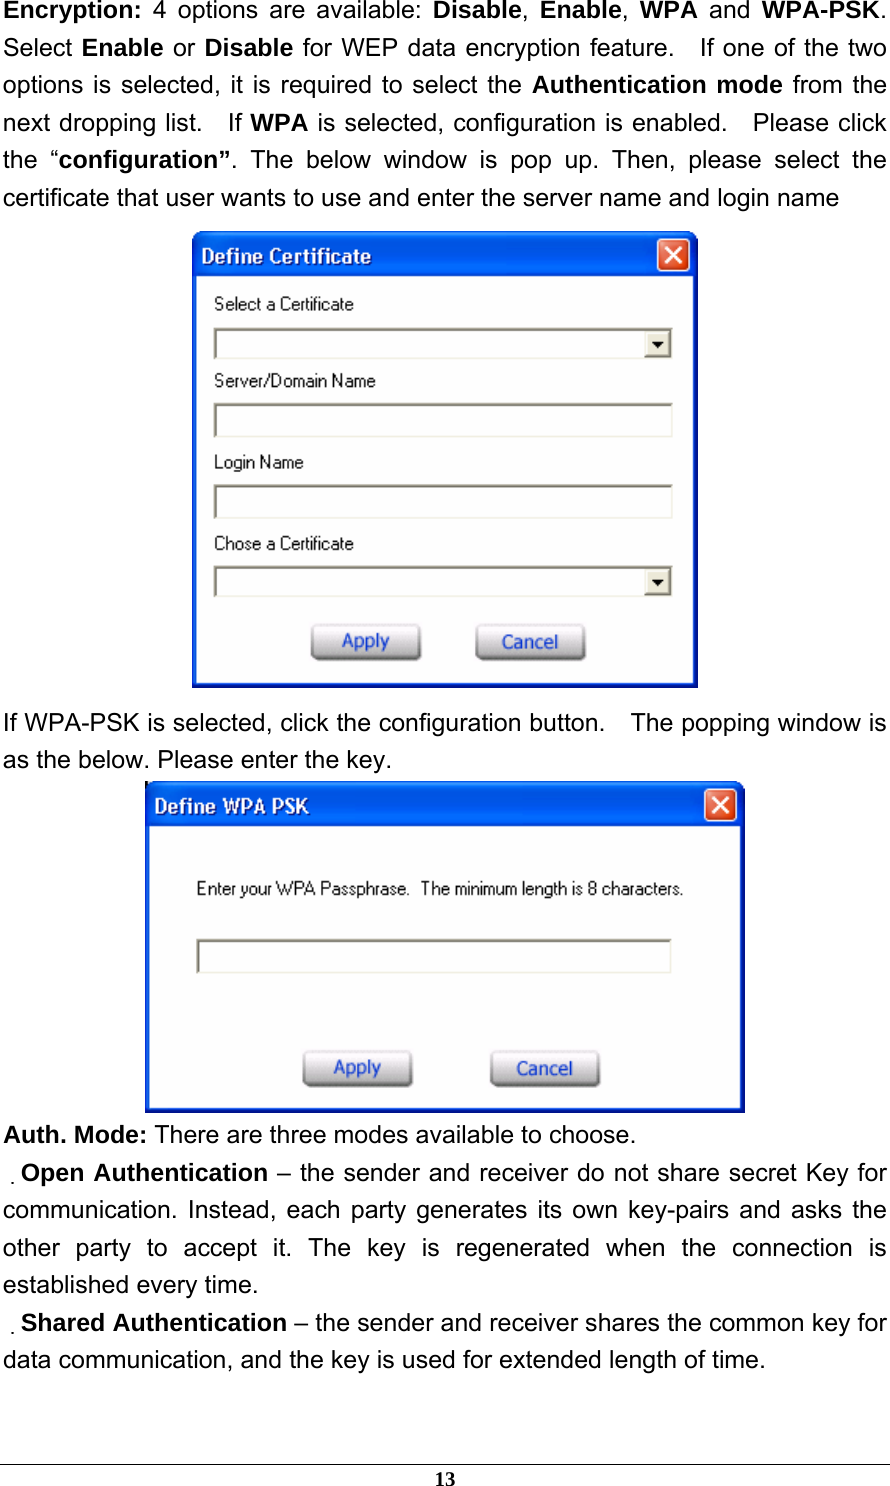  Encryption:  4 options are available: Disable,  Enable,  WPA and WPA-PSK.  Select Enable or Disable for WEP data encryption feature.  If one of the two options is selected, it is required to select the Authentication mode from the next dropping list.    If WPA is selected, configuration is enabled.    Please click the “configuration”. The below window is pop up. Then, please select the certificate that user wants to use and enter the server name and login name  If WPA-PSK is selected, click the configuration button.    The popping window is as the below. Please enter the key.  Auth. Mode: There are three modes available to choose. 　Open Authentication – the sender and receiver do not share secret Key for communication. Instead, each party generates its own key-pairs and asks the other party to accept it. The key is regenerated when the connection is established every time. 　Shared Authentication – the sender and receiver shares the common key for data communication, and the key is used for extended length of time.  13 